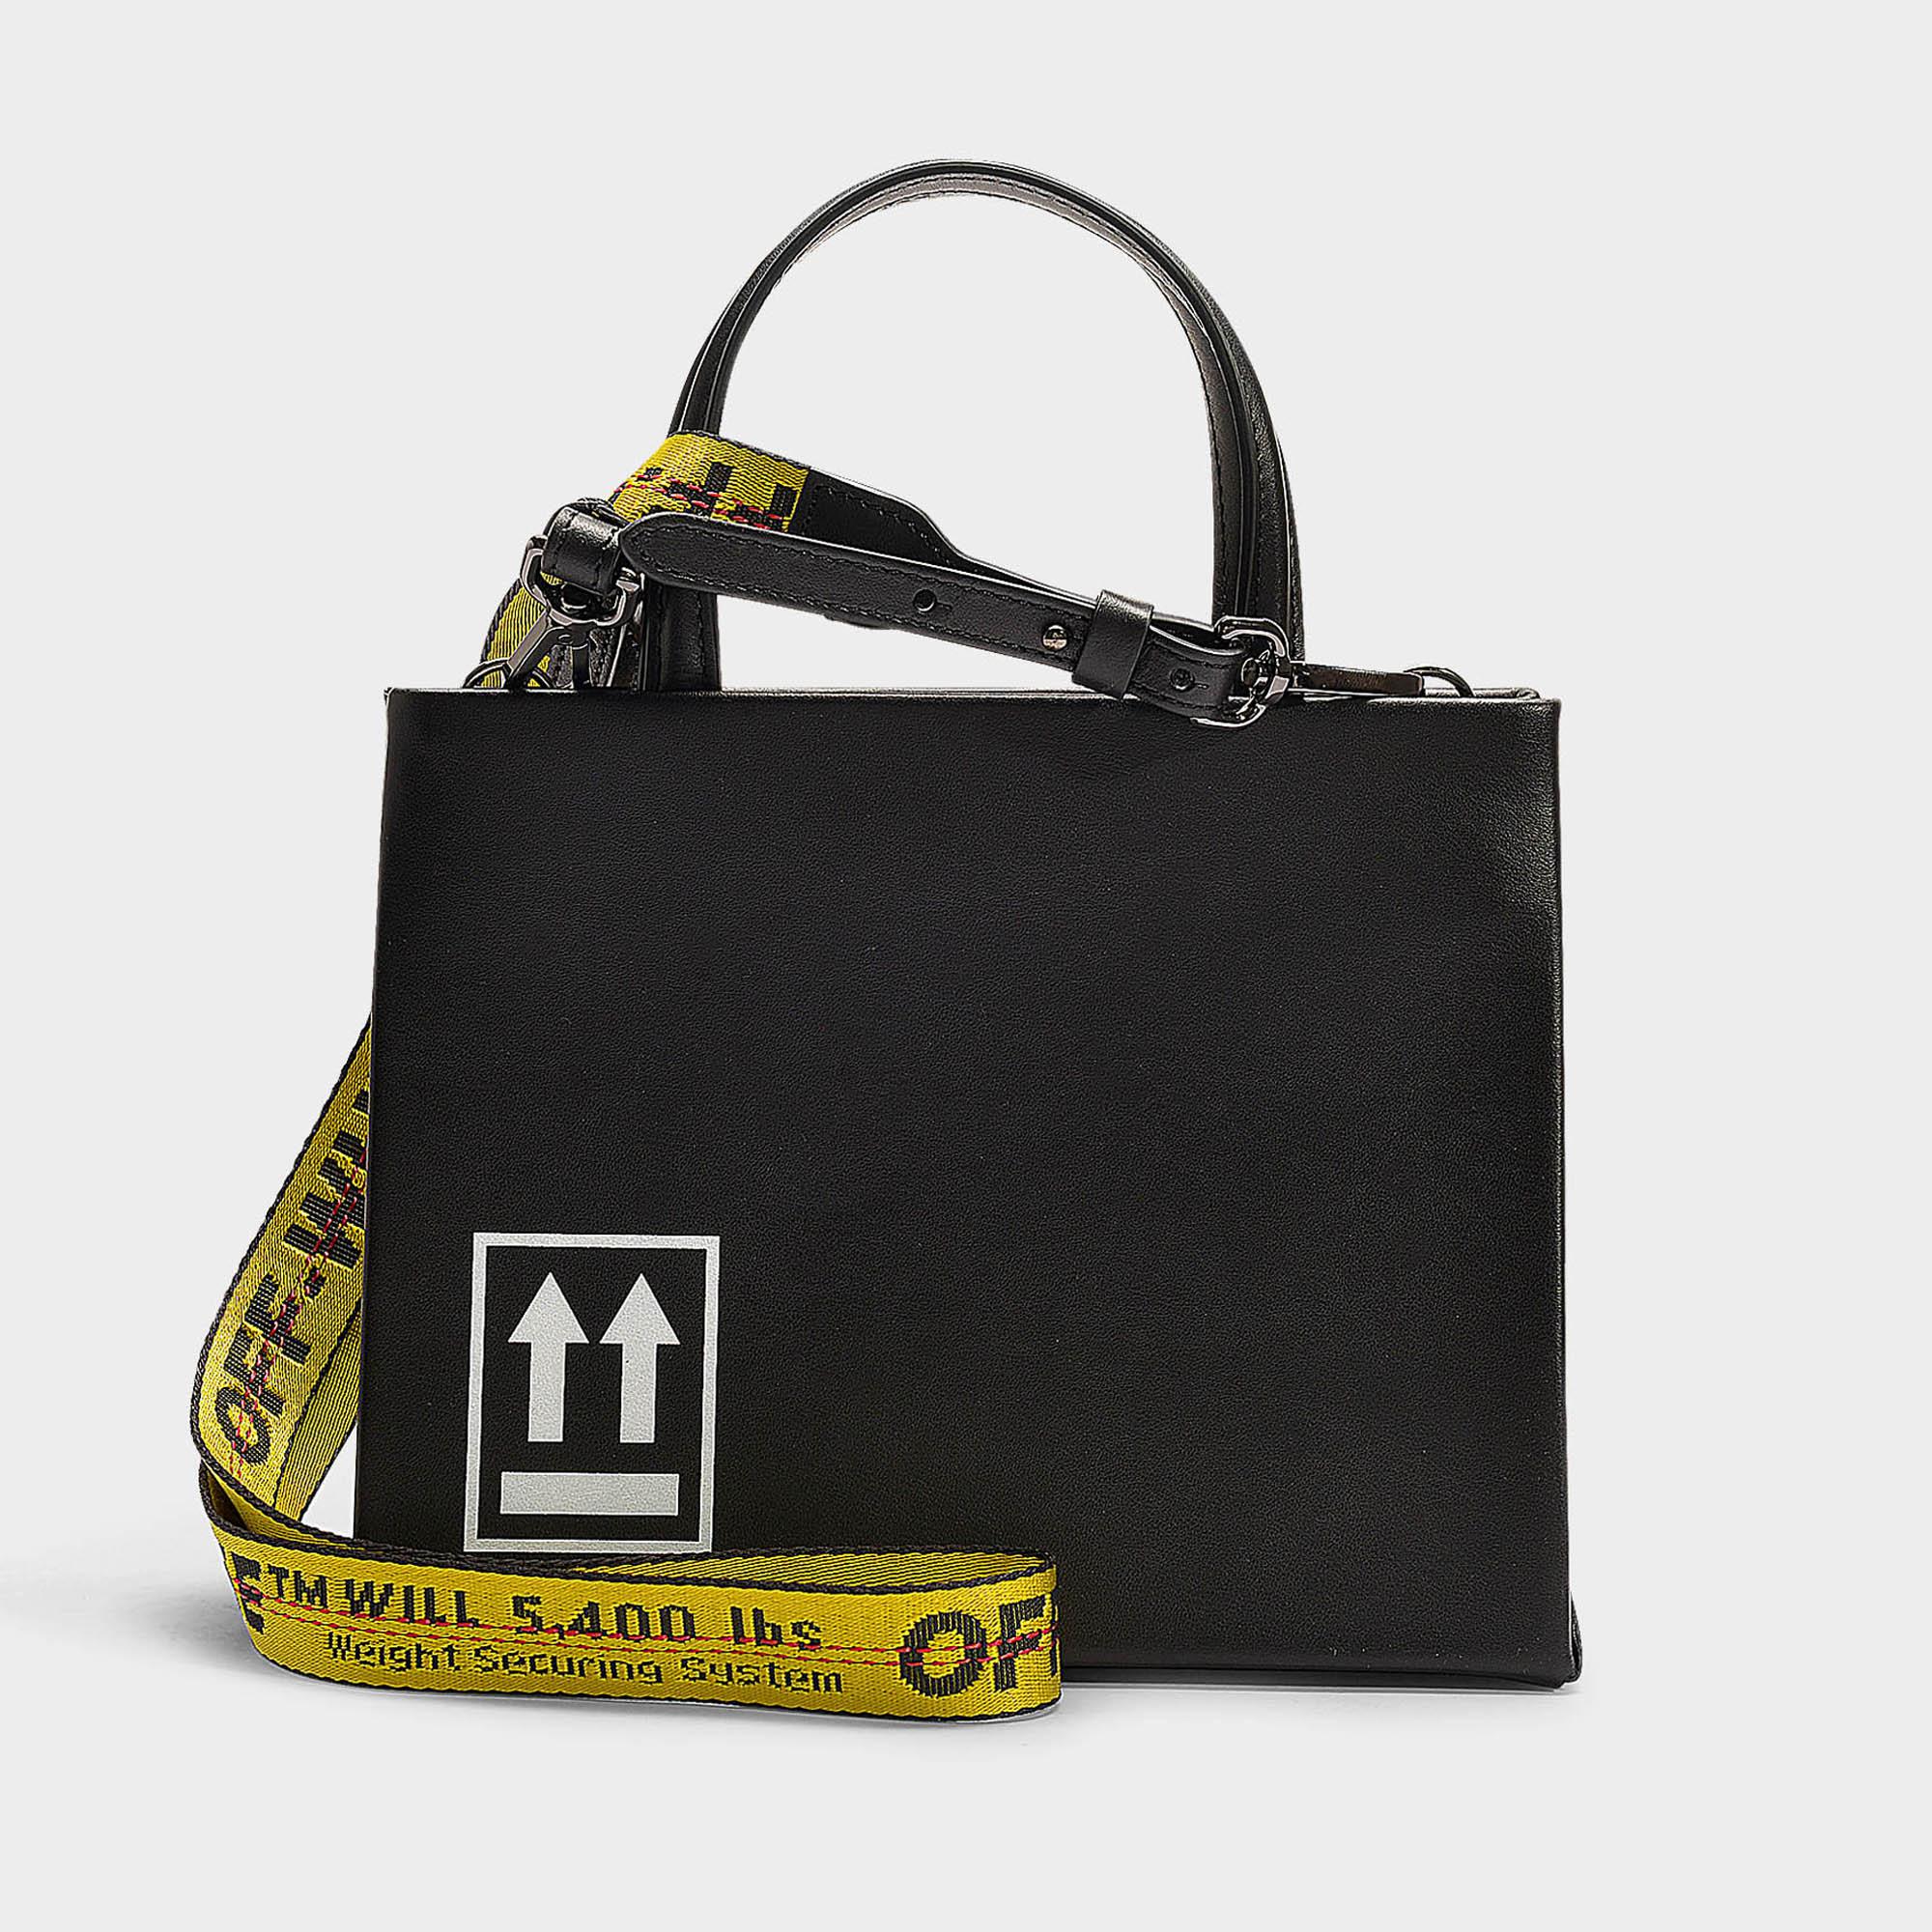 Off-White c/o Virgil Abloh Small Box Bag In Black And White